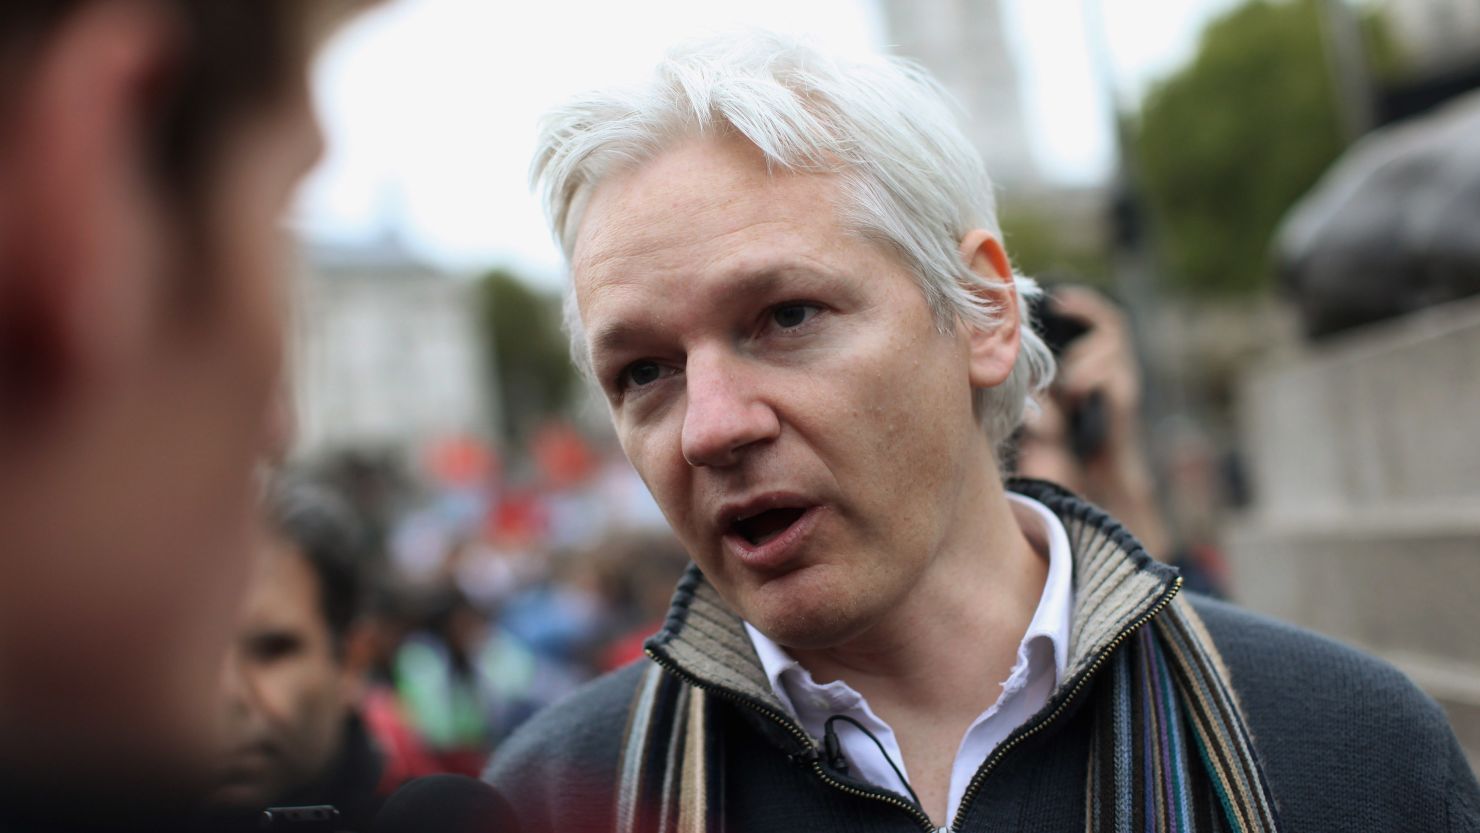 Julian Assange has been holed up inside the Ecuadorian Embassy in London since petitioning for asylum on June 19. (File)